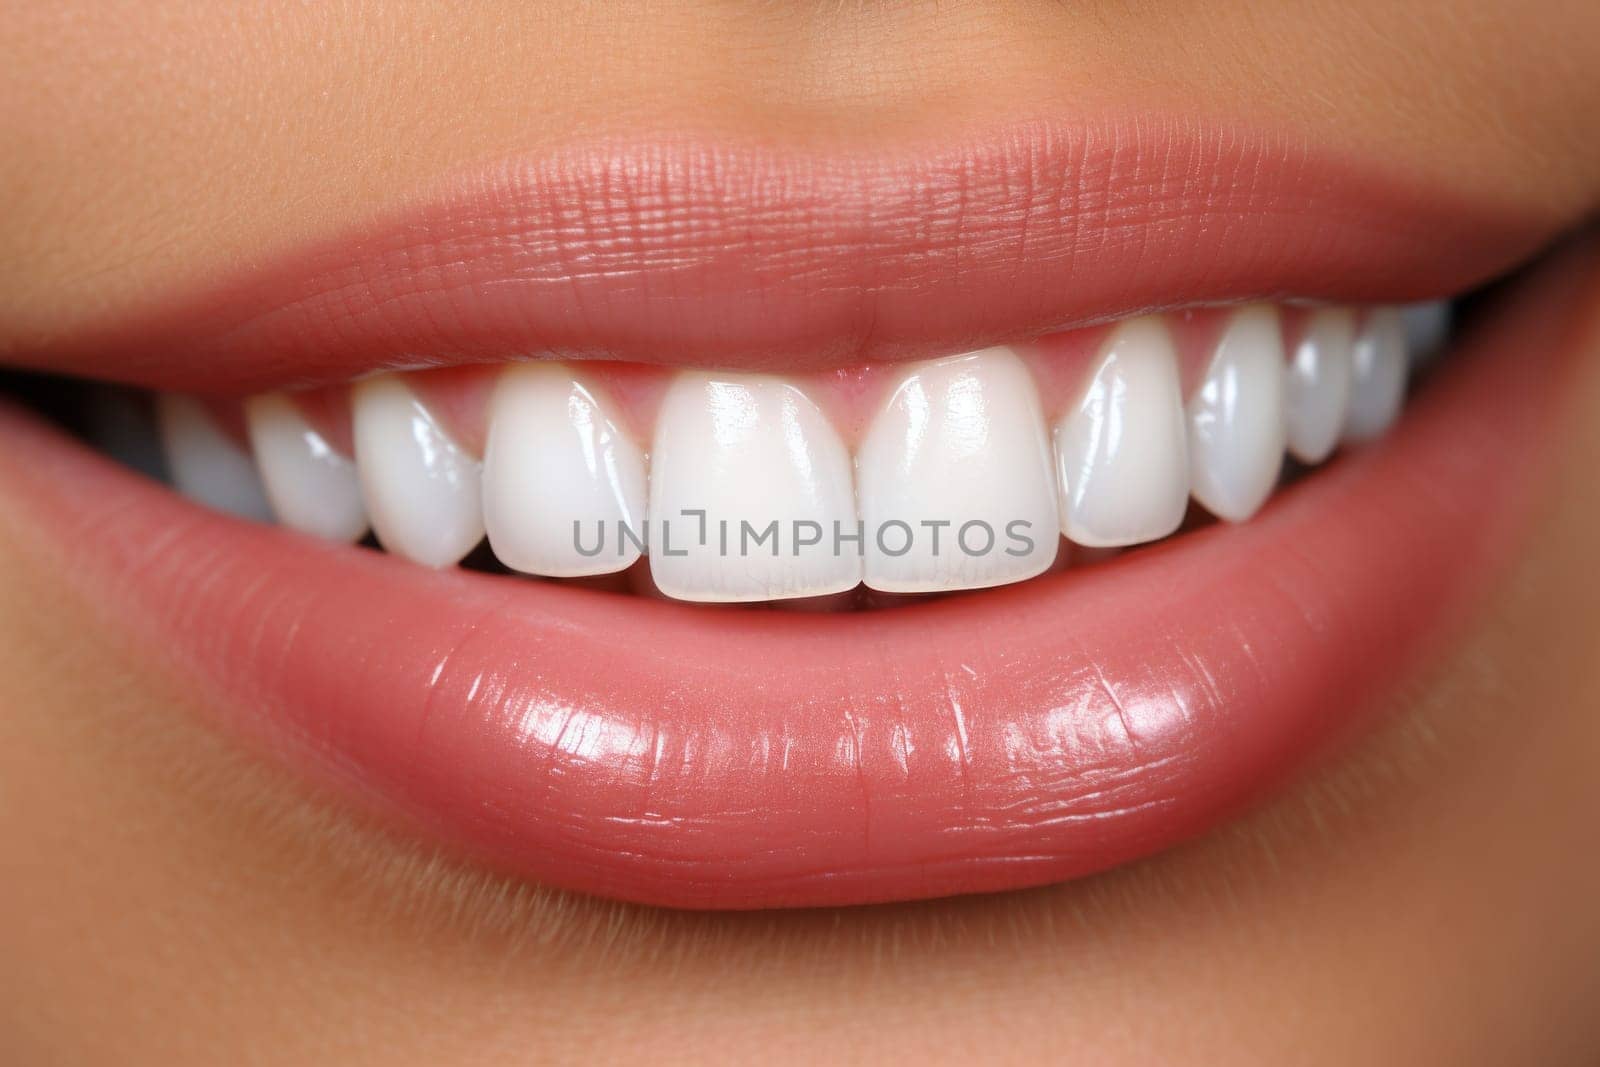 Exuding Radiance: Captivating Close-up of a Woman's Perfectly White Teeth and Joyful Smile by PhotoTime